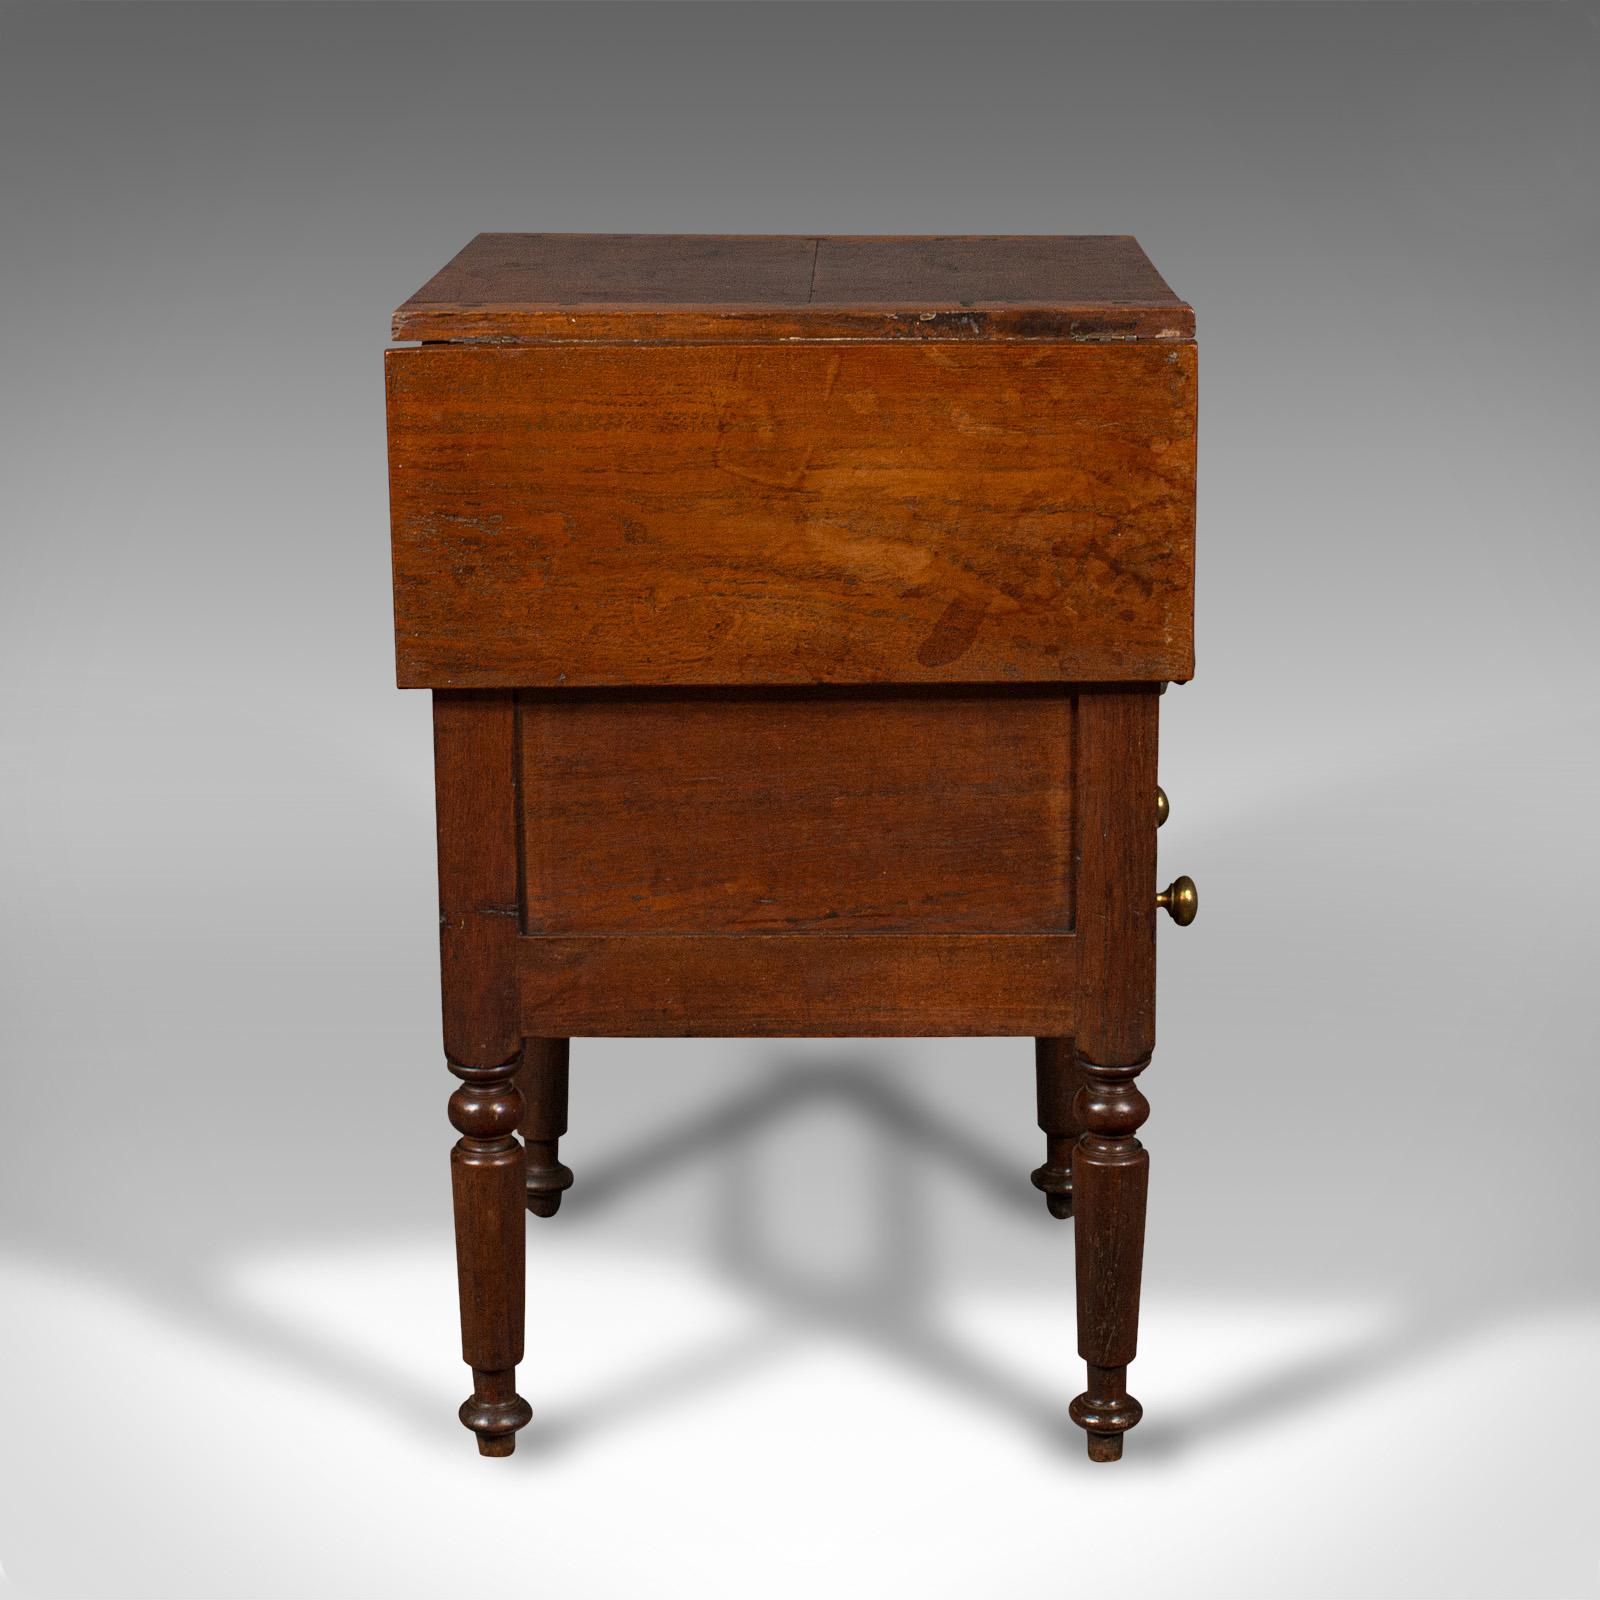 Antique Ship's Wash Stand, English, Drop Flap Nightstand, Victorian, Circa 1850 In Good Condition For Sale In Hele, Devon, GB